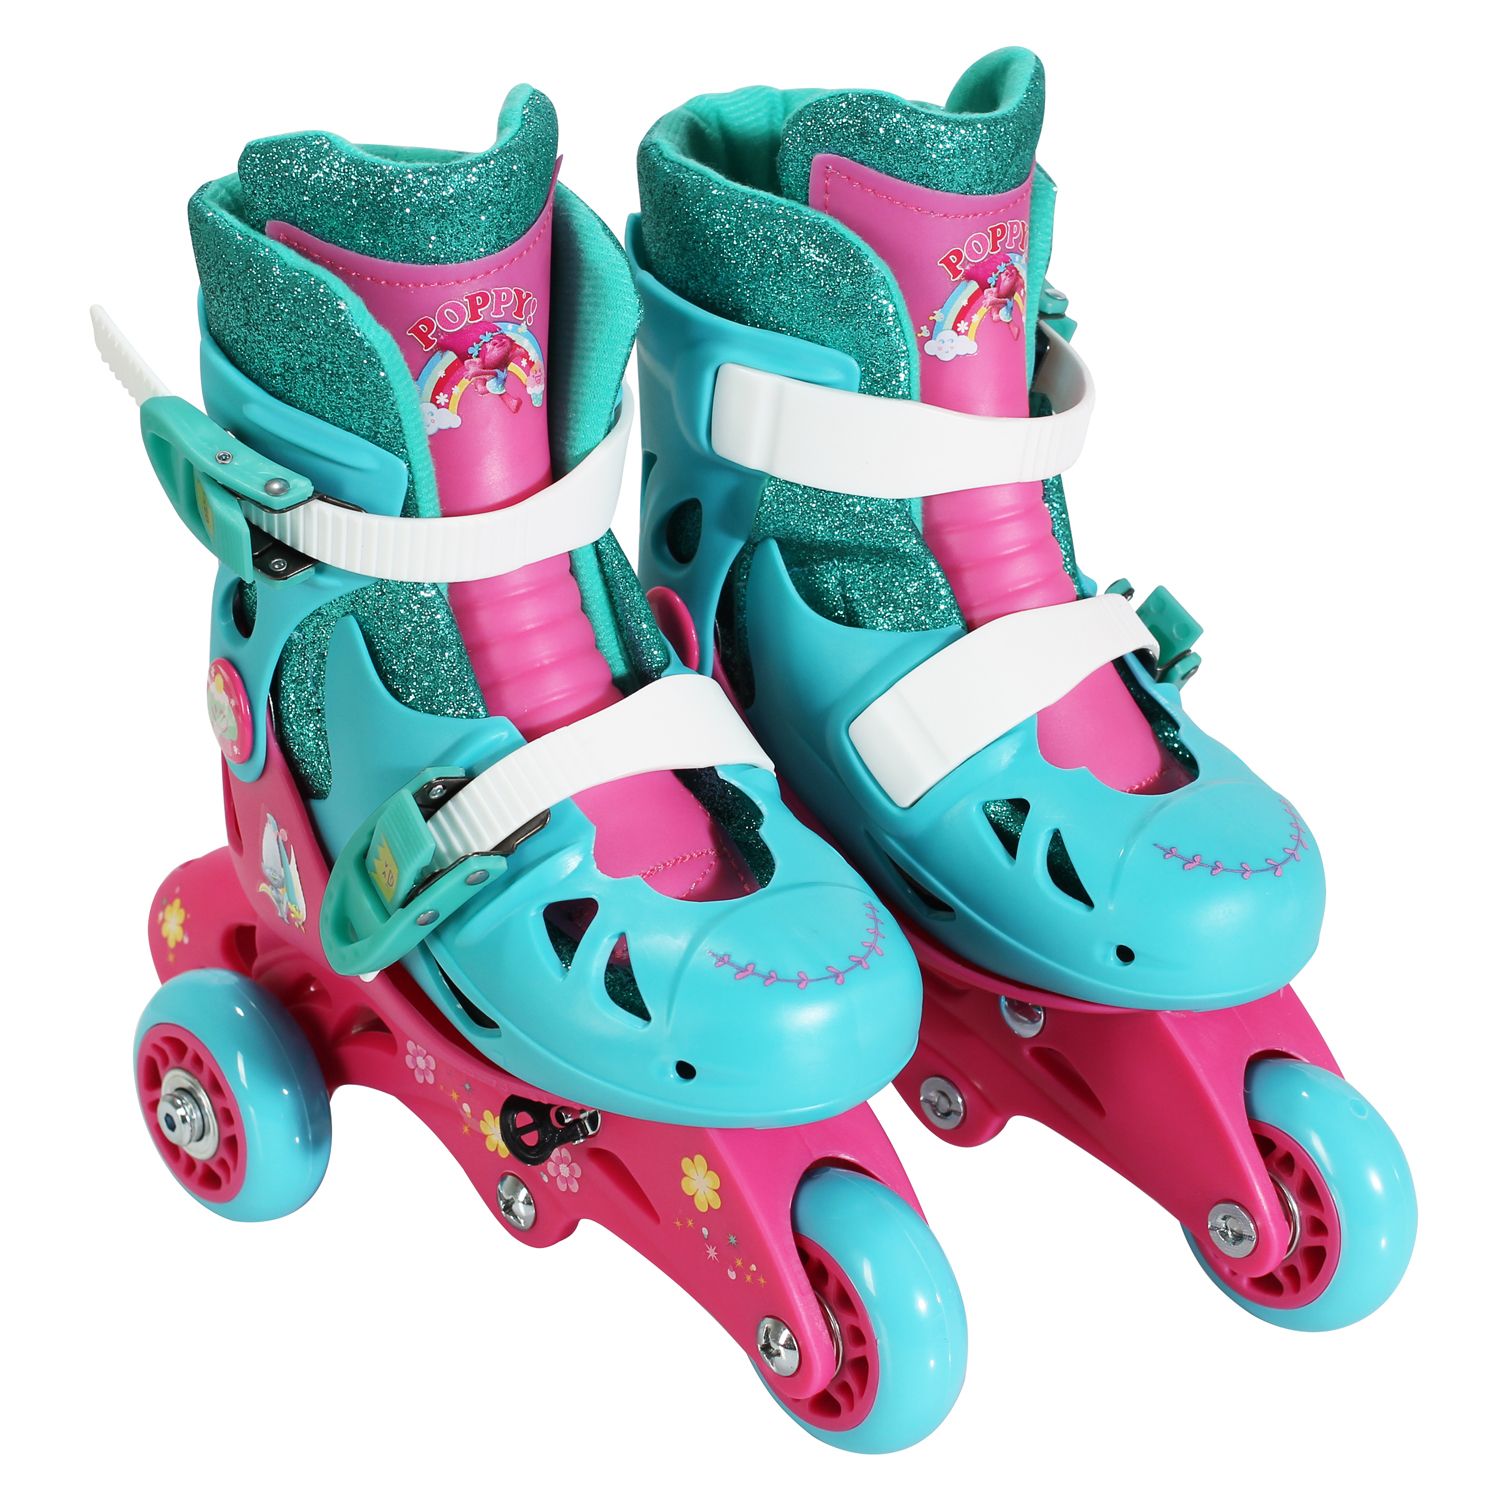 Image for DreamWorks Trolls Poppy Youth Glitter Convertible Roller Skates by PlayWheels at Kohl's.